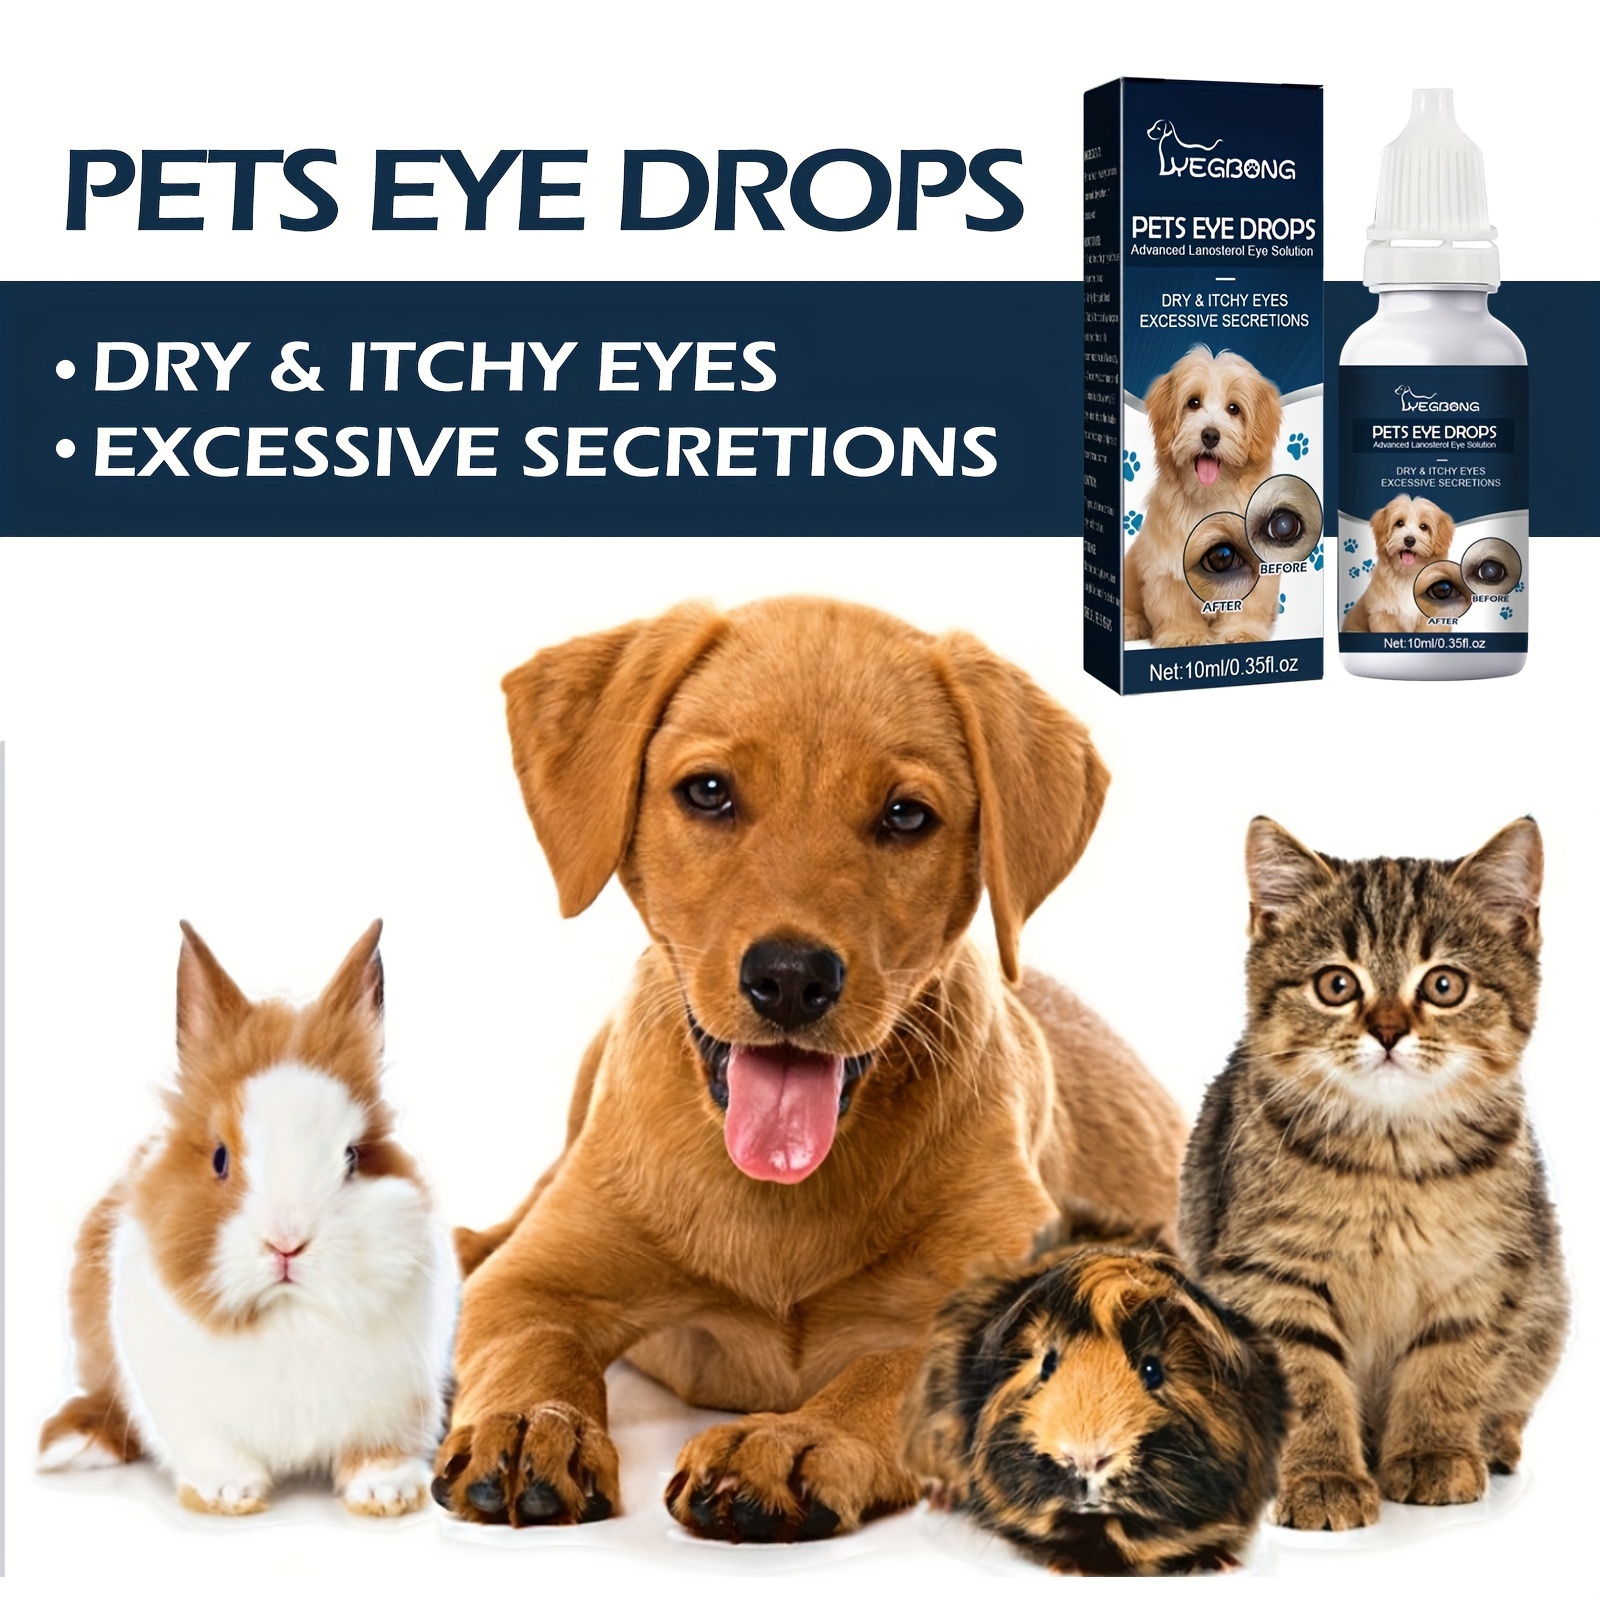 

Gentle Pet Eye Drops For Dogs - Tear Stain Remover & Itch Relief, Mild Cleansing Formula